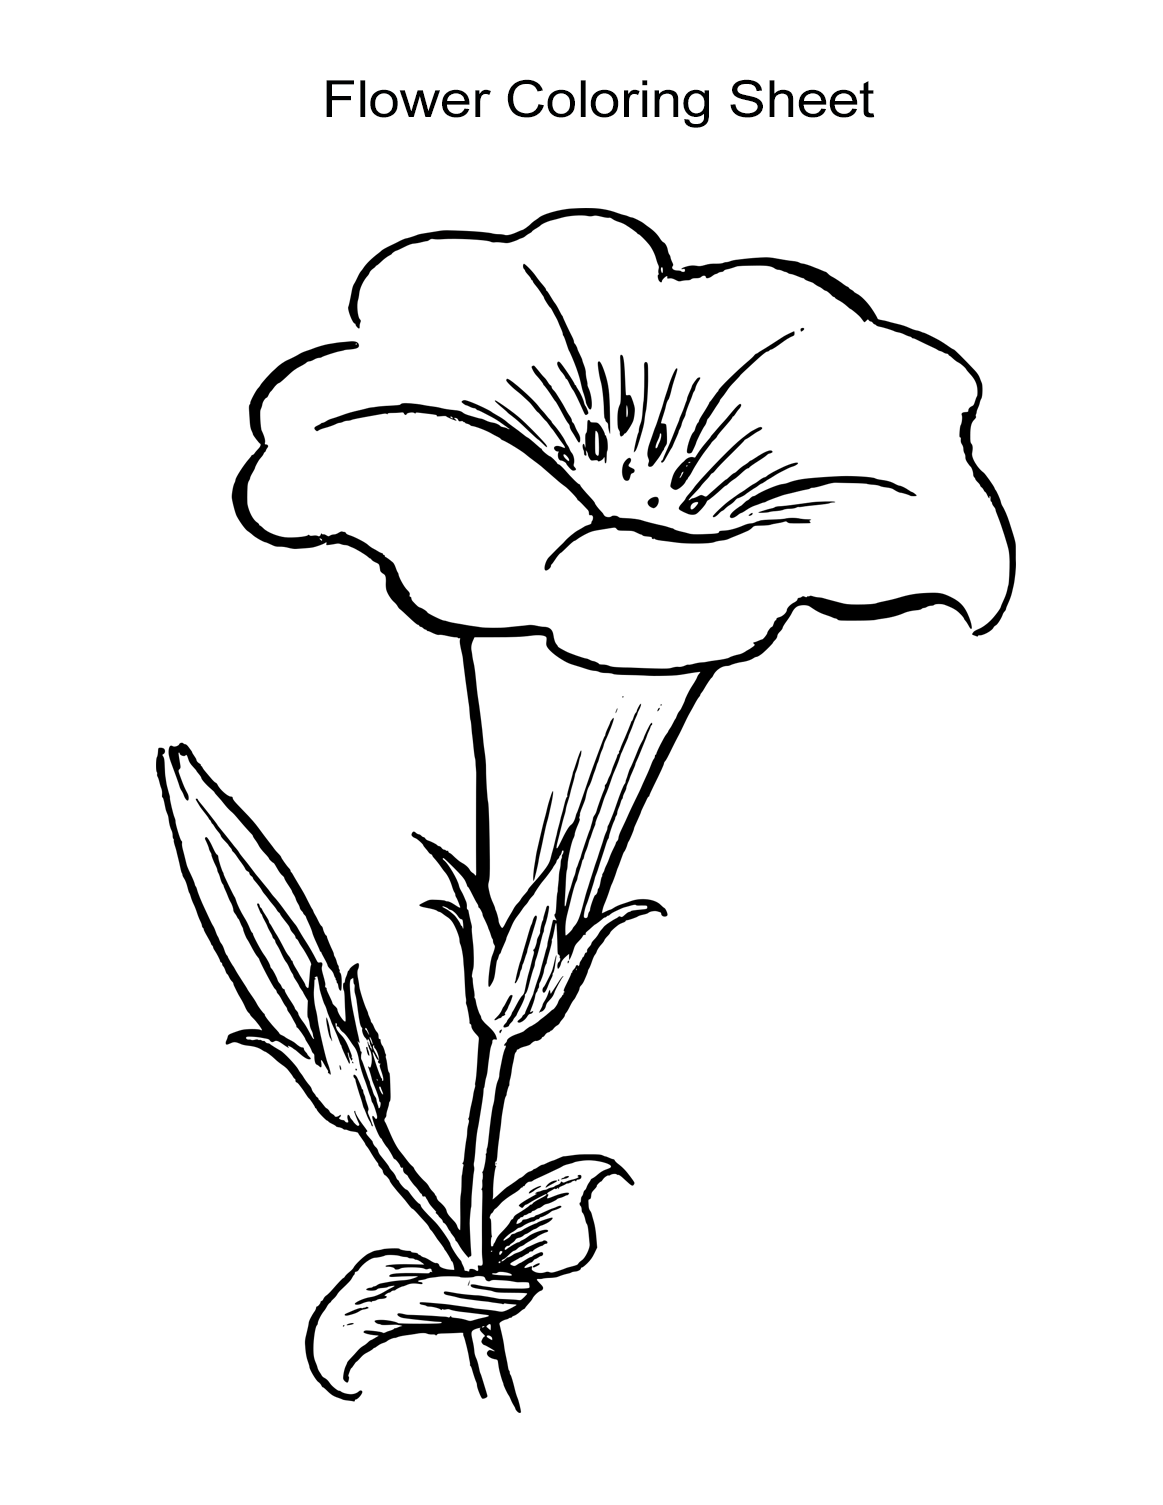 flower images to color free printable flower coloring pages for kids best images flower to color 